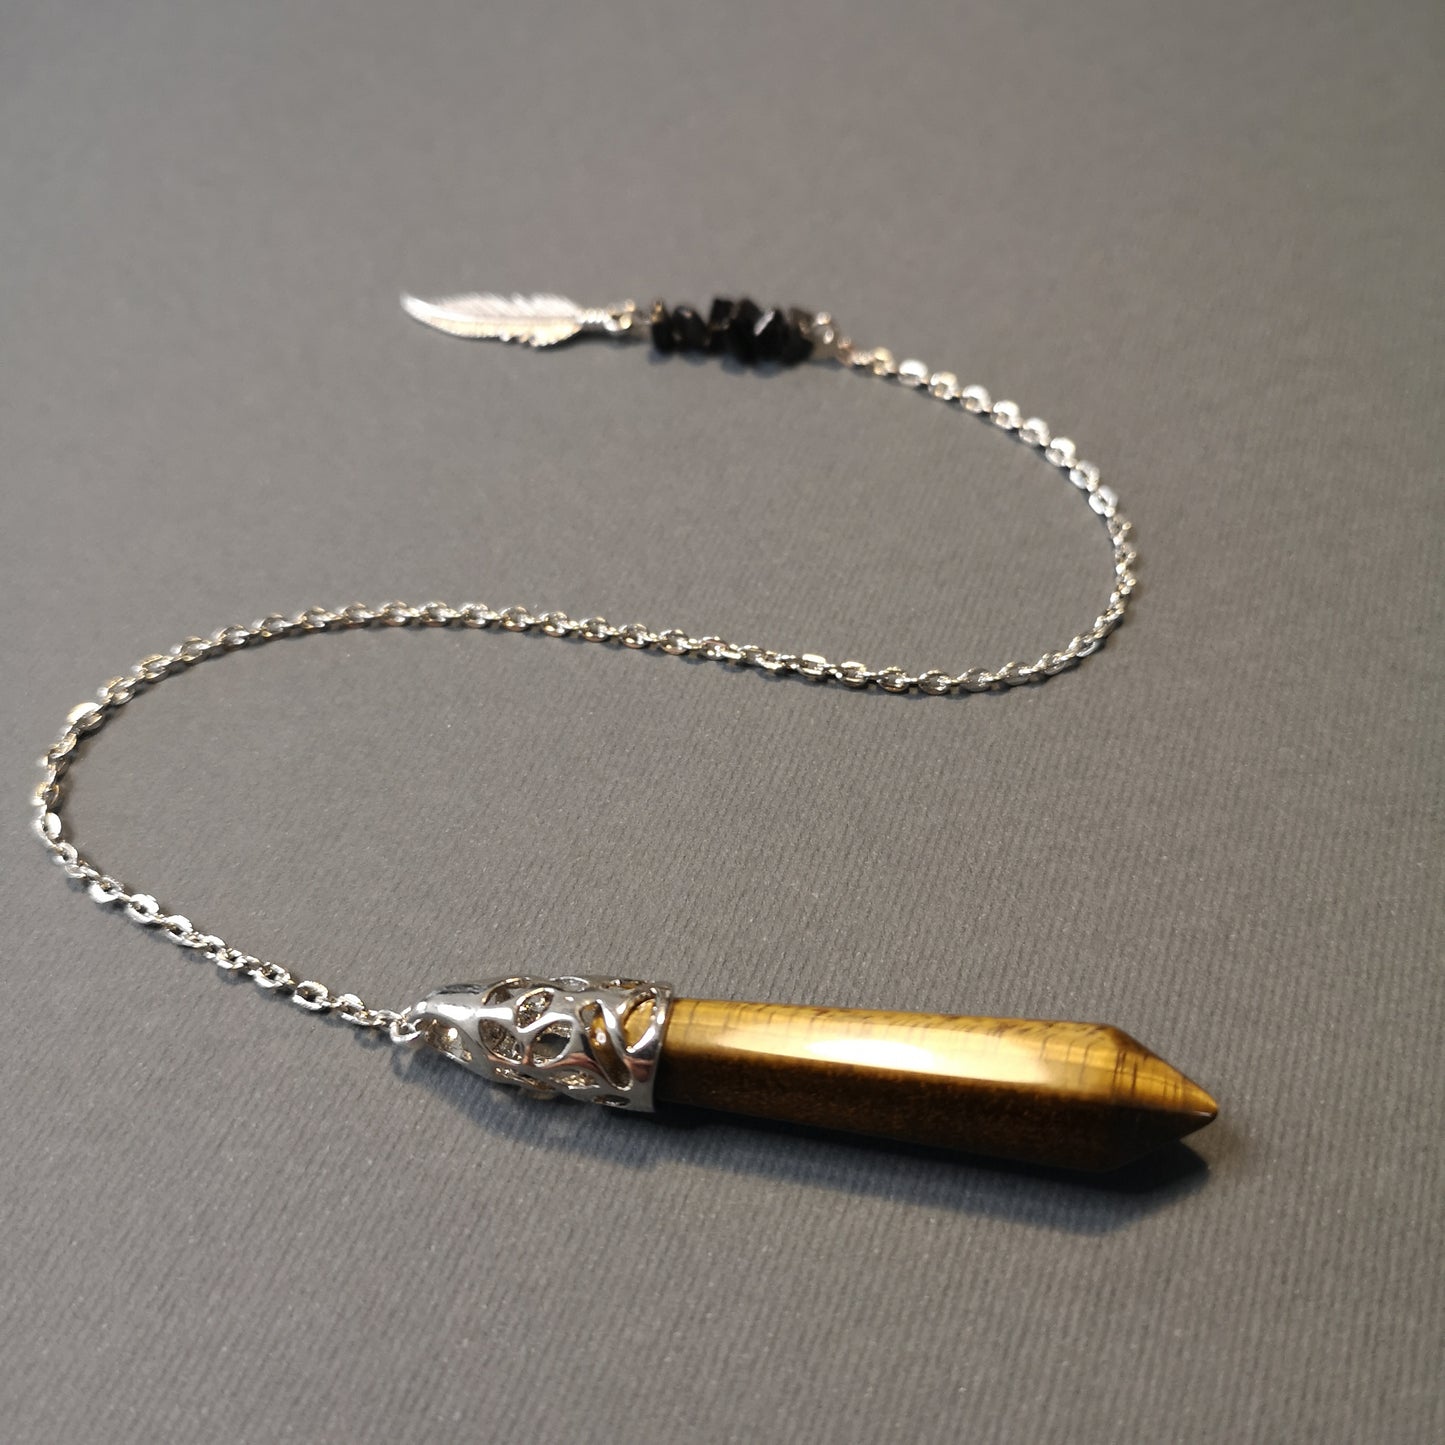 Tiger eye, obsidian and feather pendulum